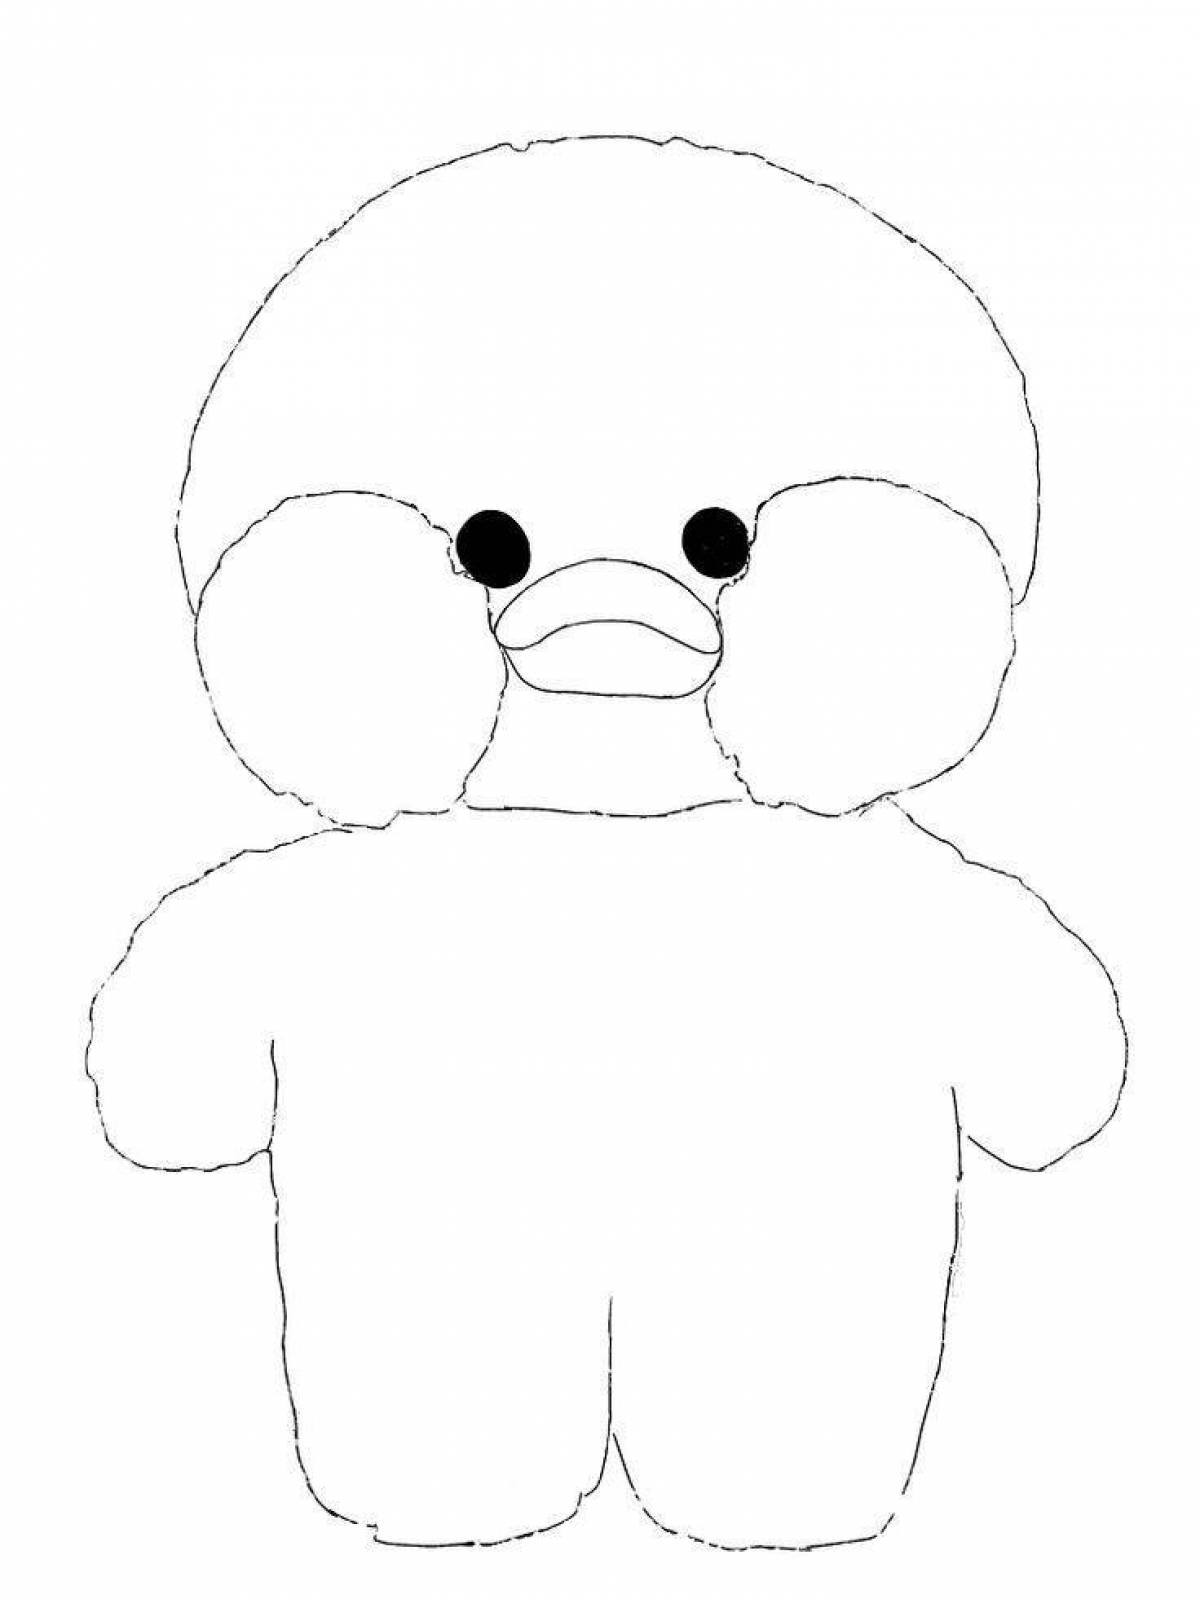 Coloring page lalaphan duck